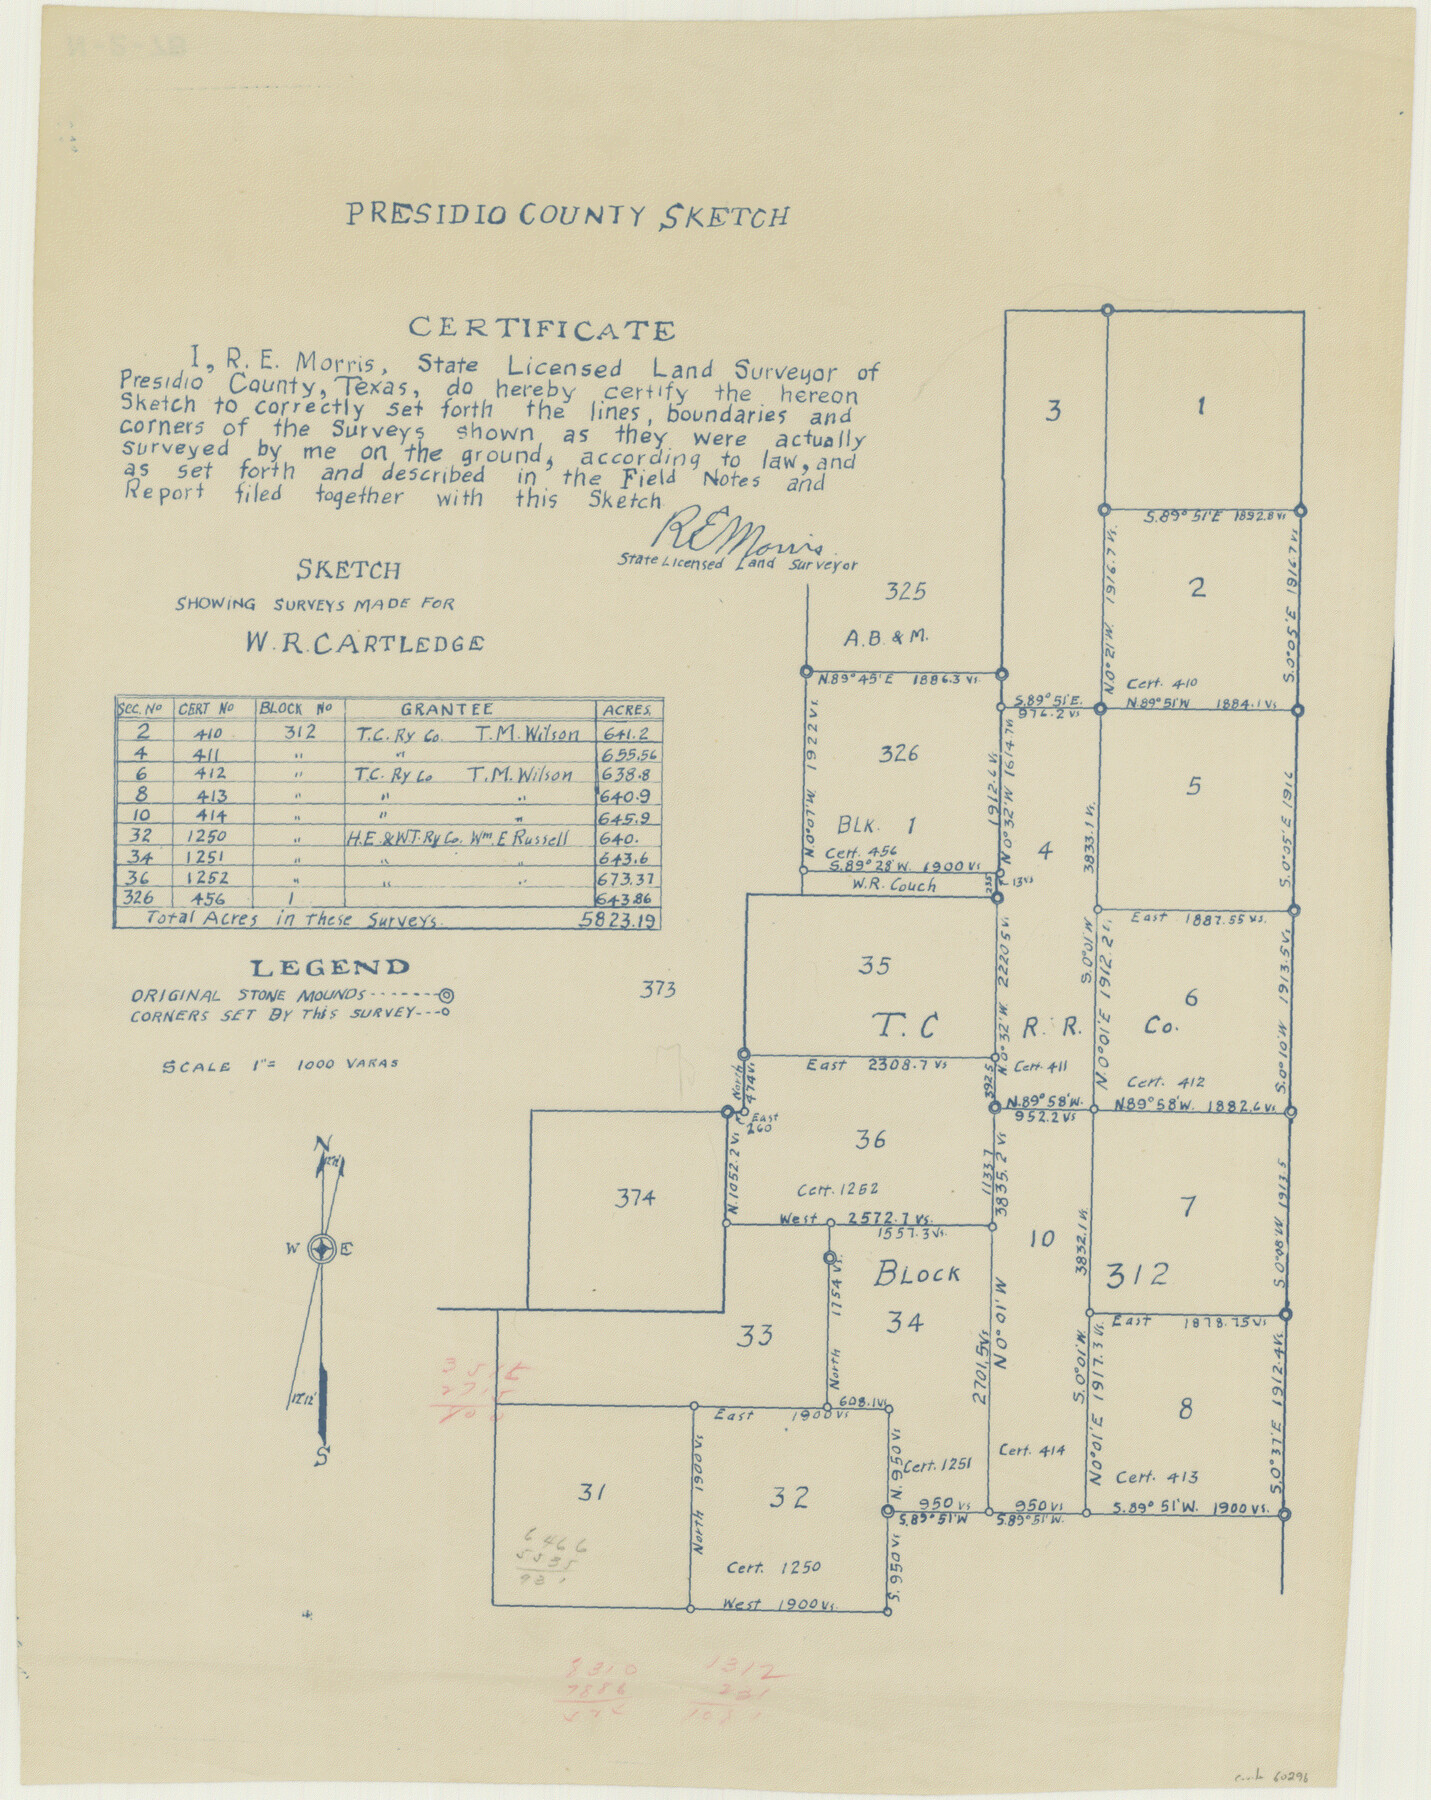 60296, Sketch Showing Surveys Made for W. R. Cartledge, General Map Collection